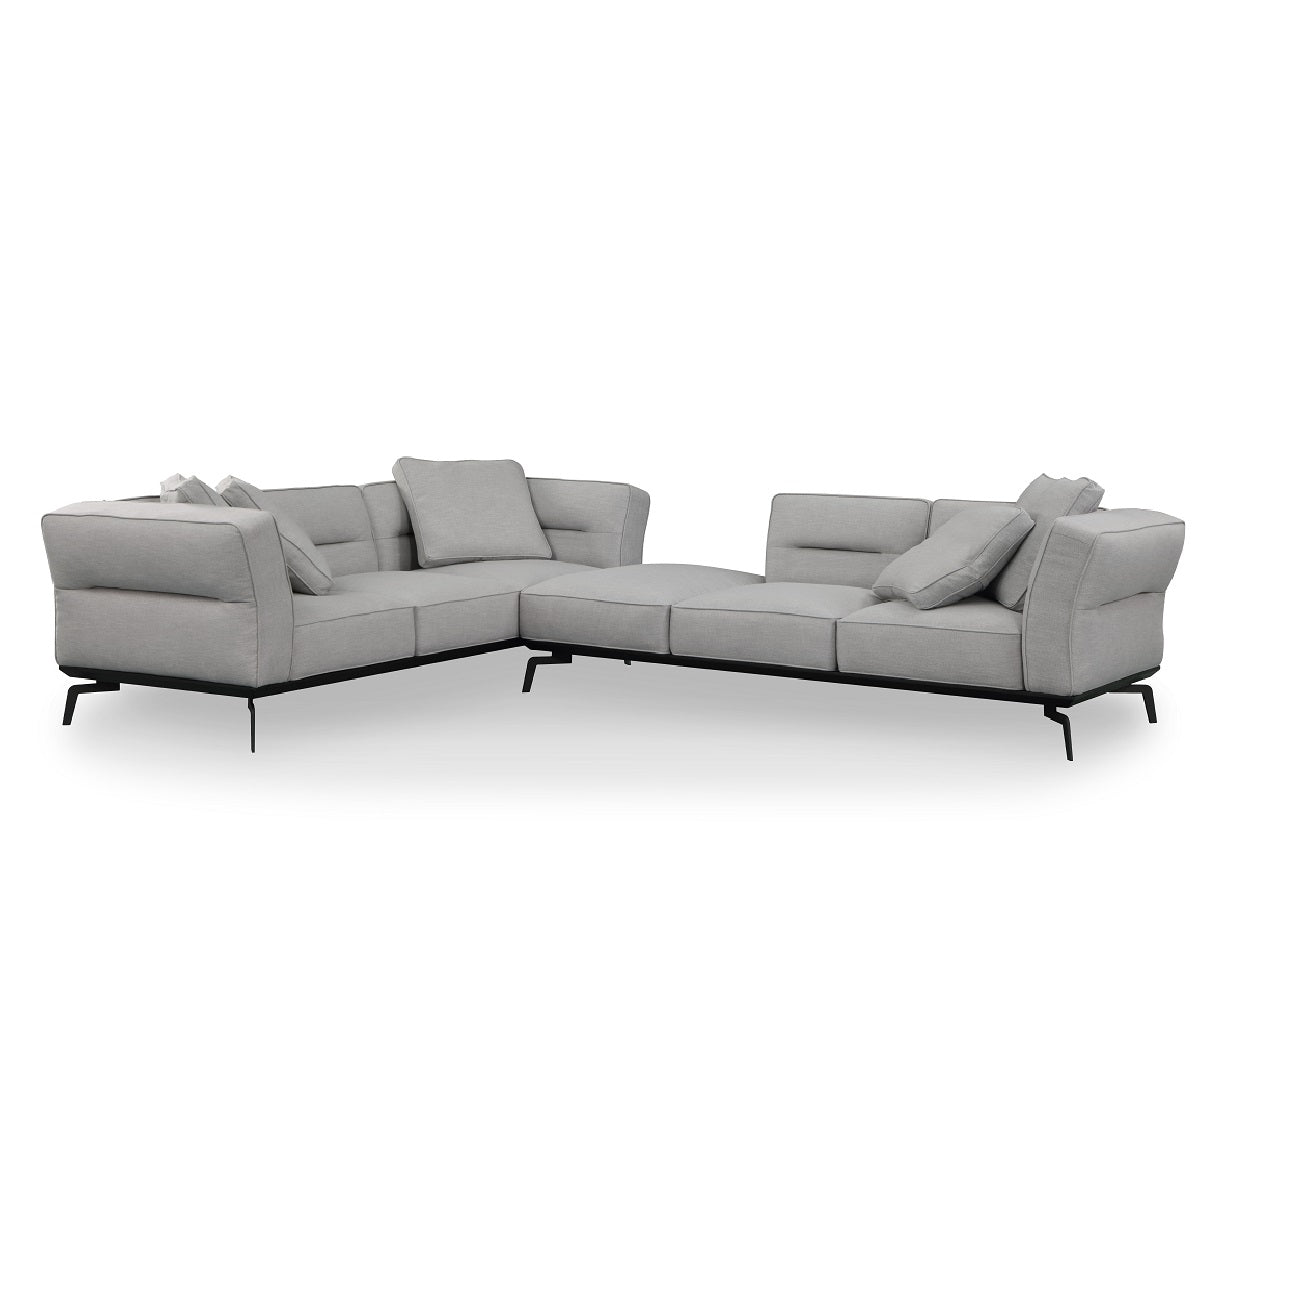 Merino 2-Piece Sectional - Furniture.Agency